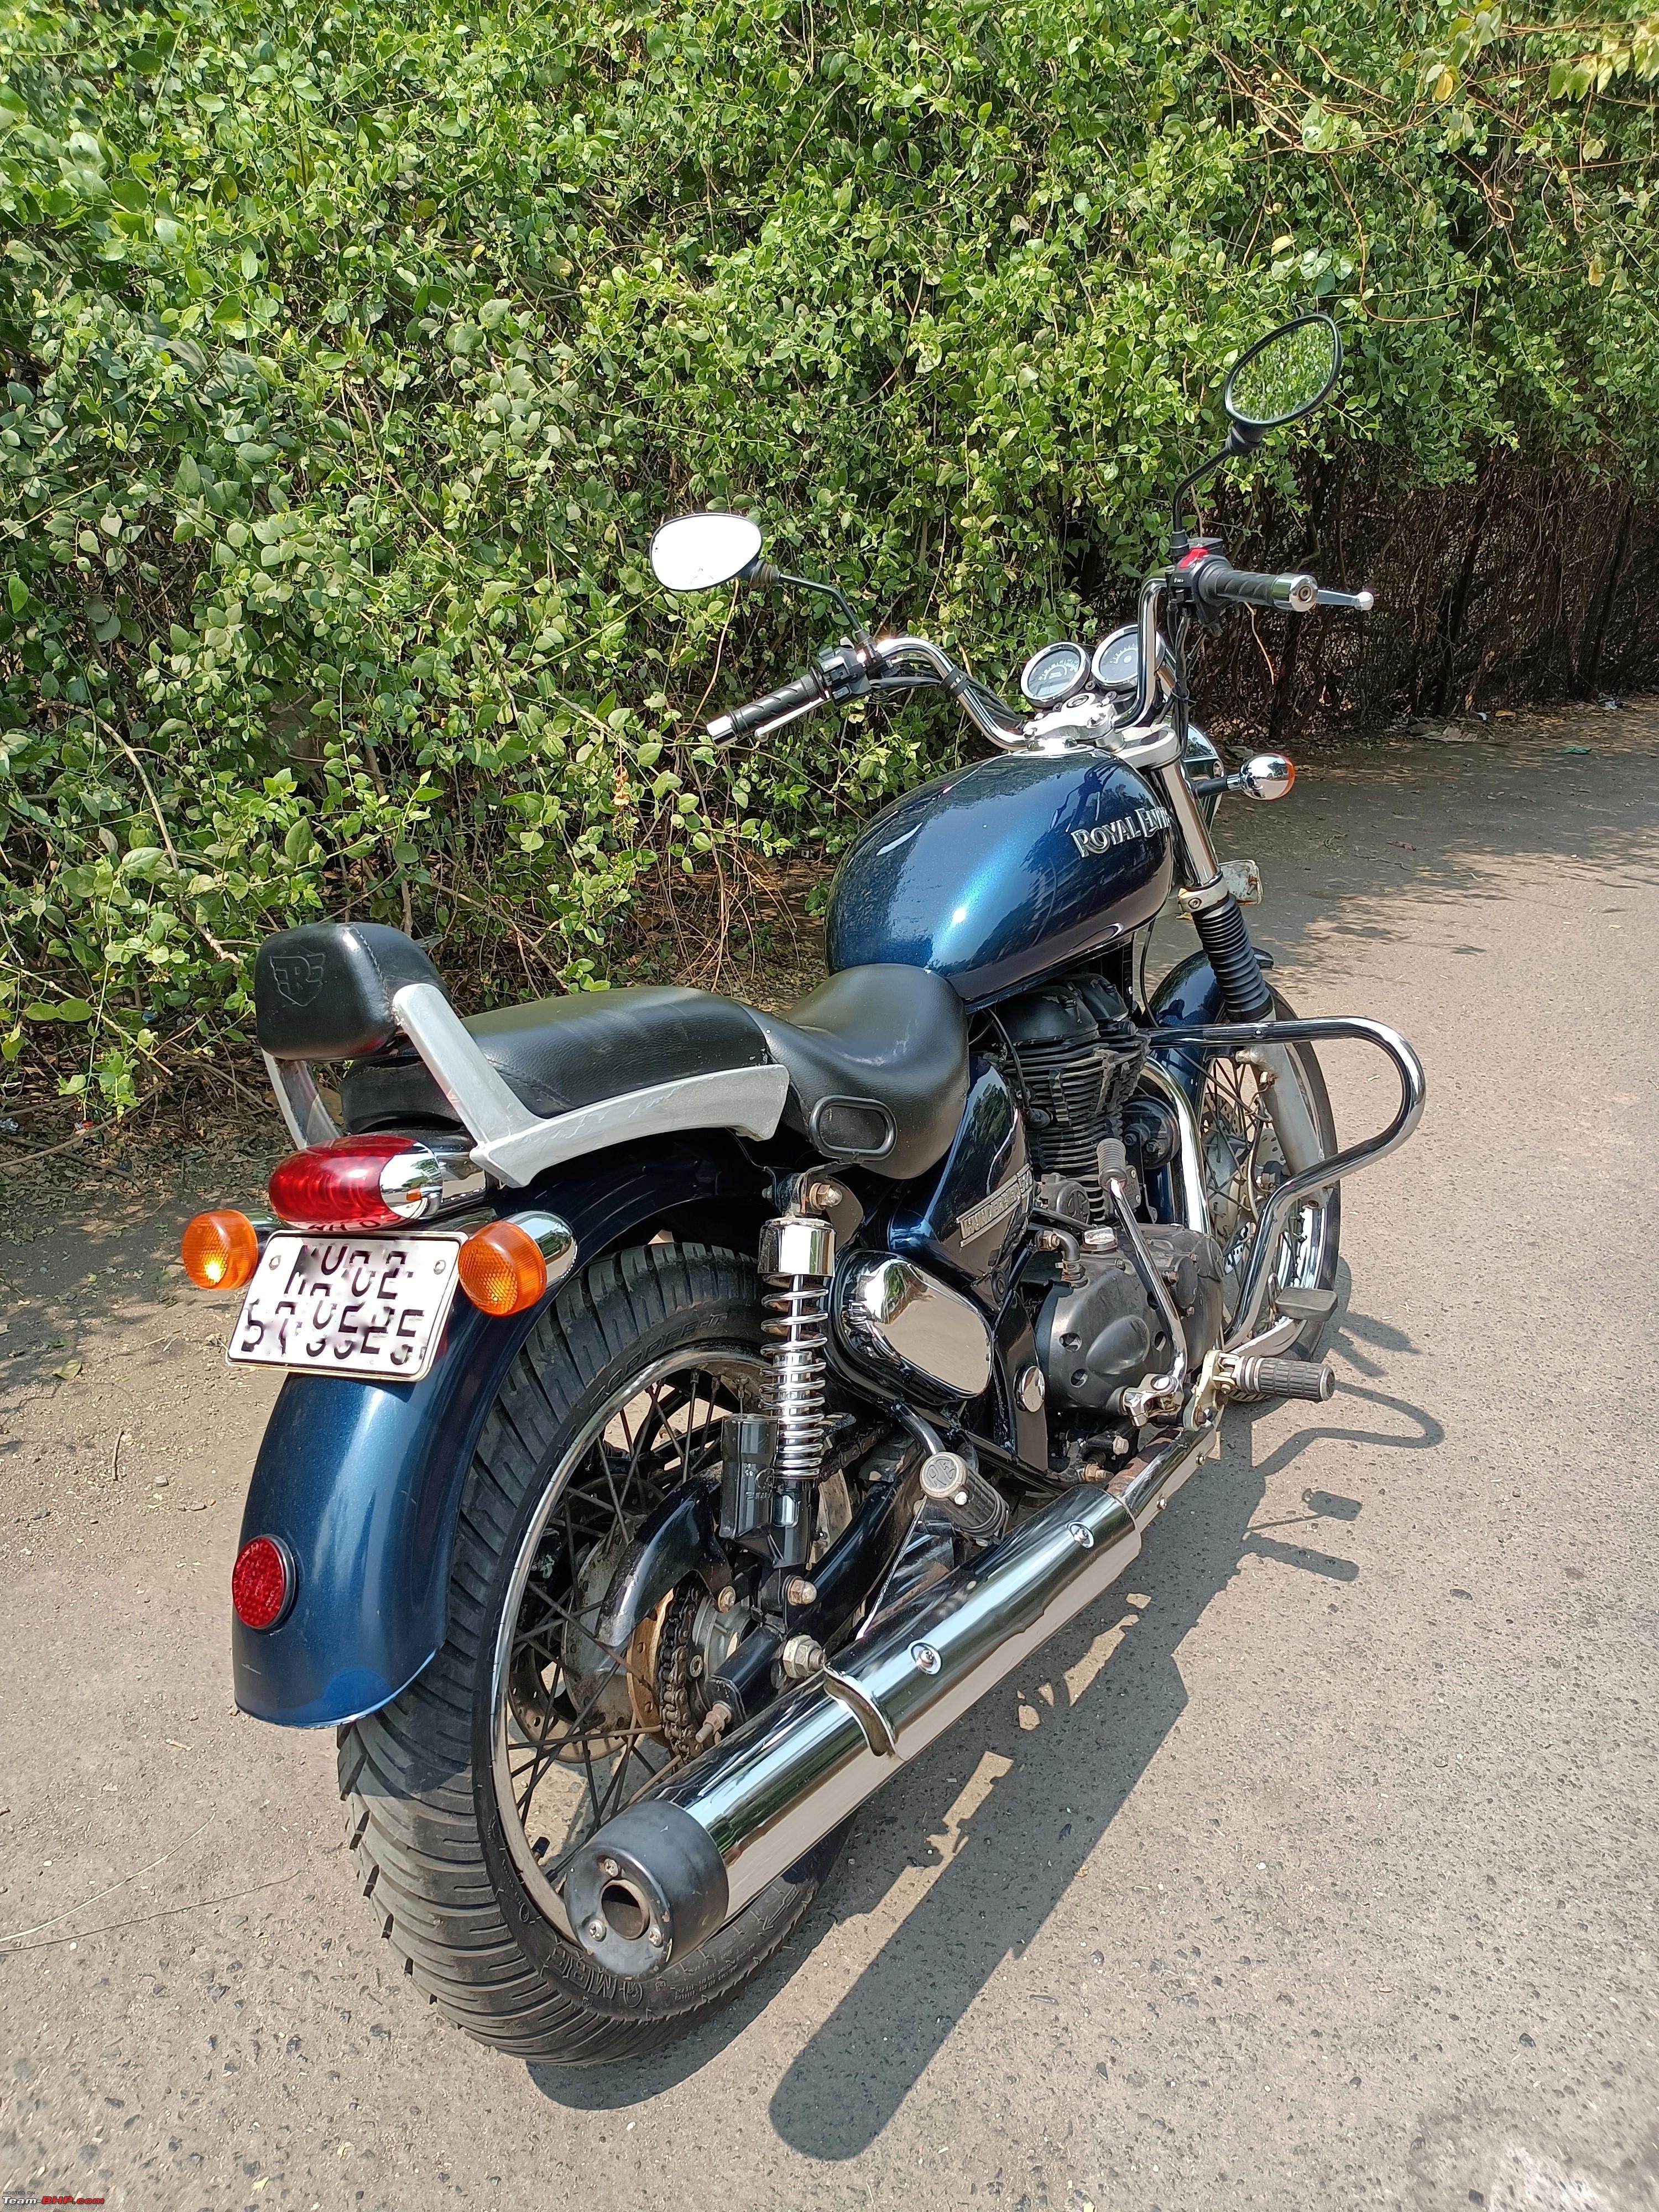 Undying hunger, my 5th Royal Enfield - The Thunderbird 500 - Page 7 -  Team-BHP